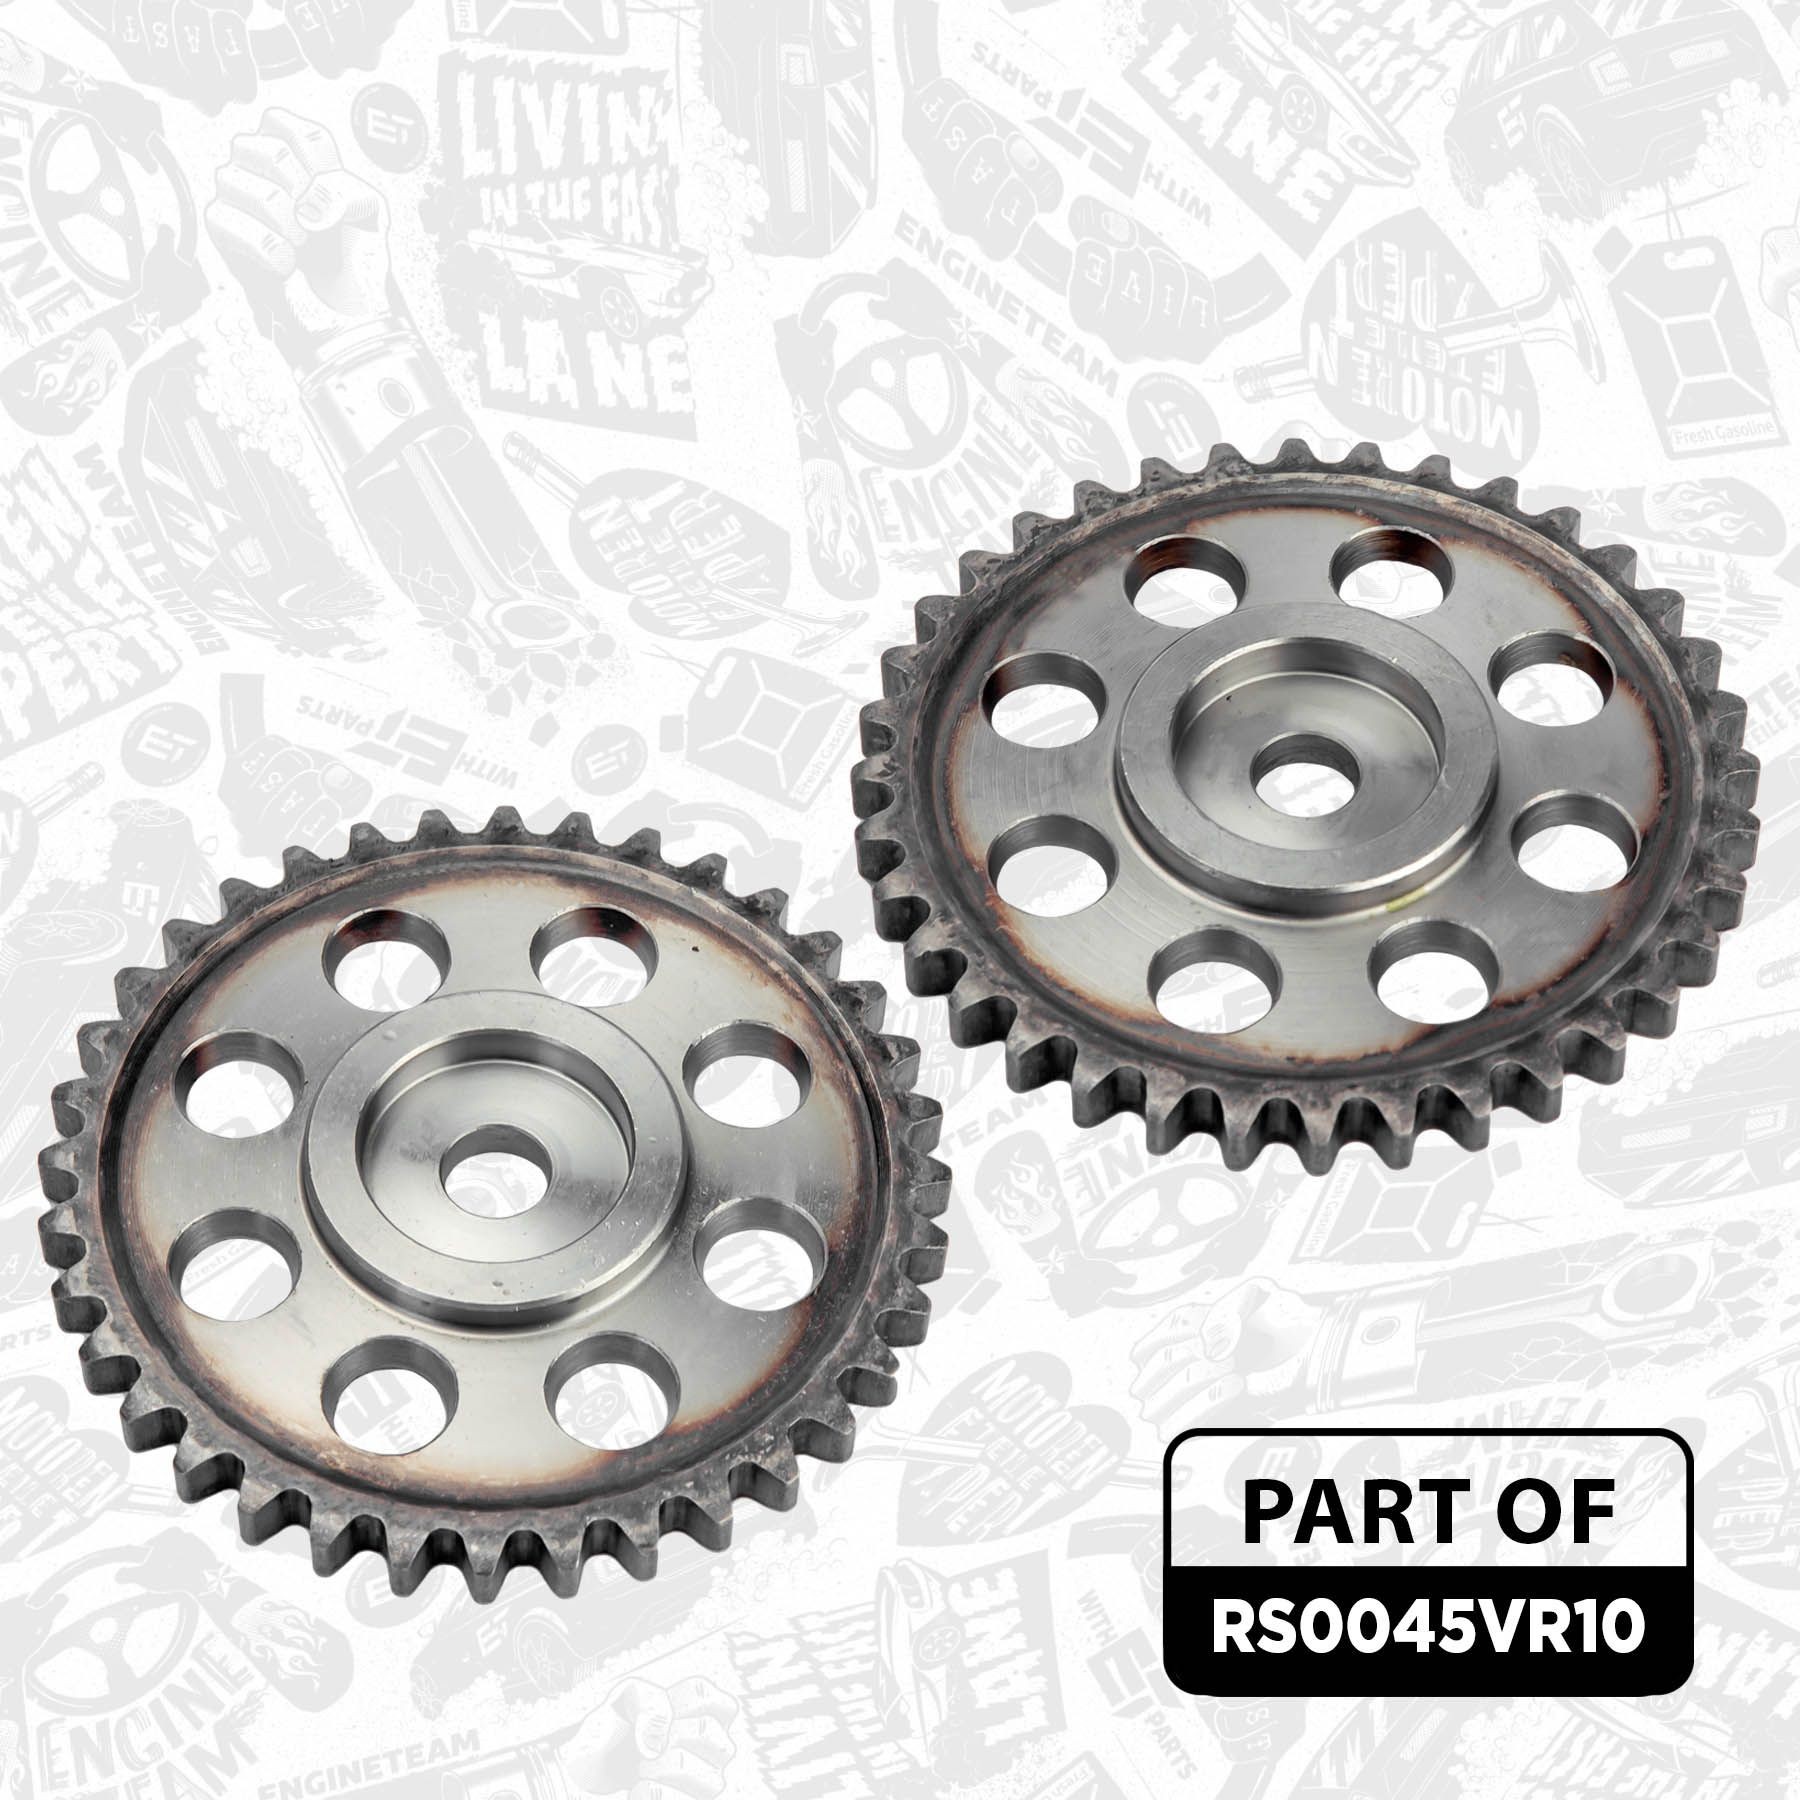 RS0045VR10 Timing chain kit RS0045VR10 ET ENGINETEAM with gears, Simplex